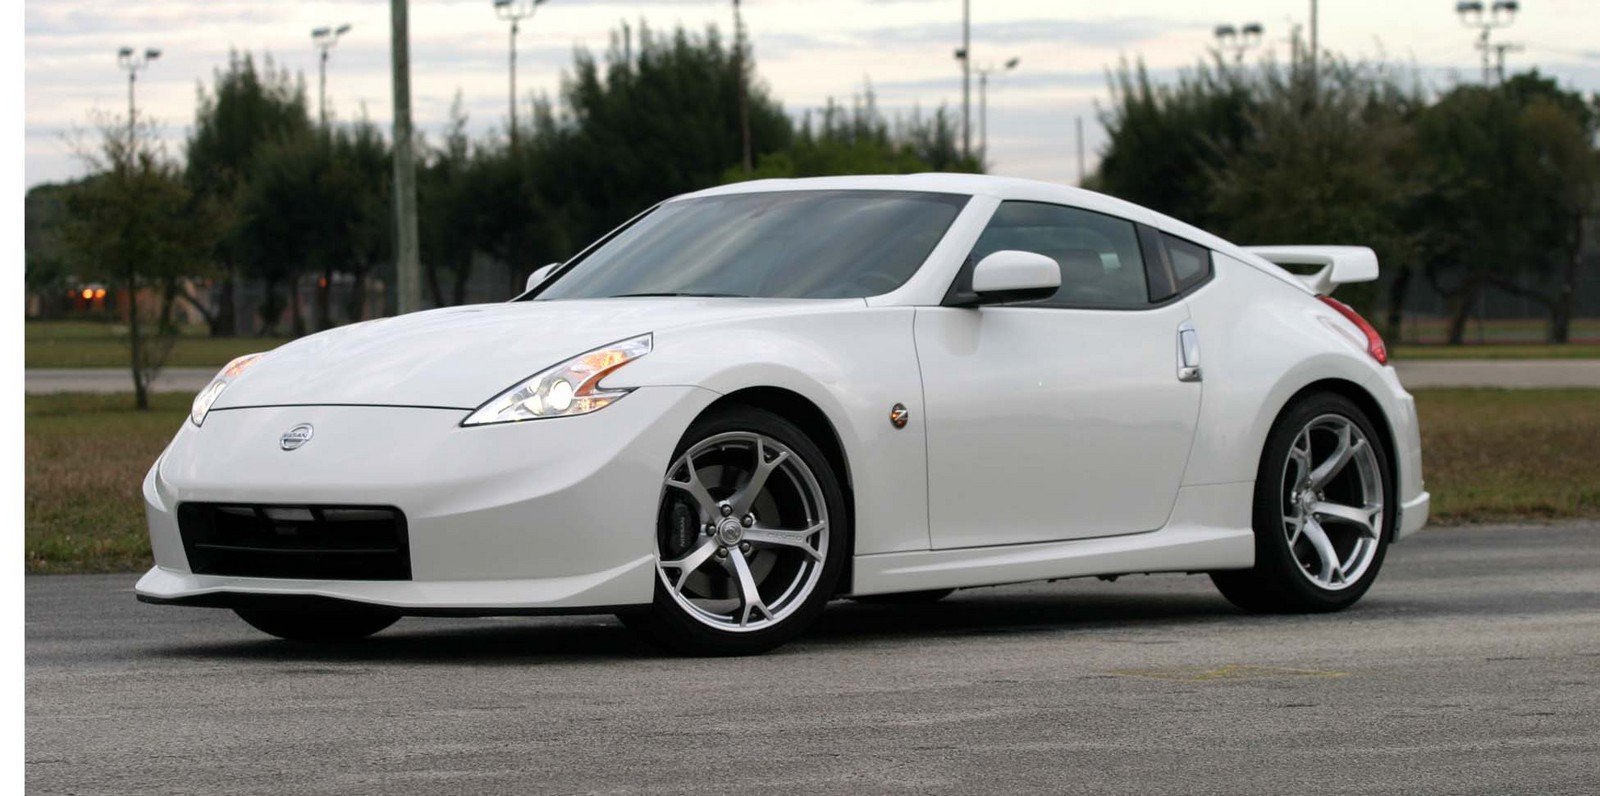 Amazing Nissan 370Z Pictures & Backgrounds